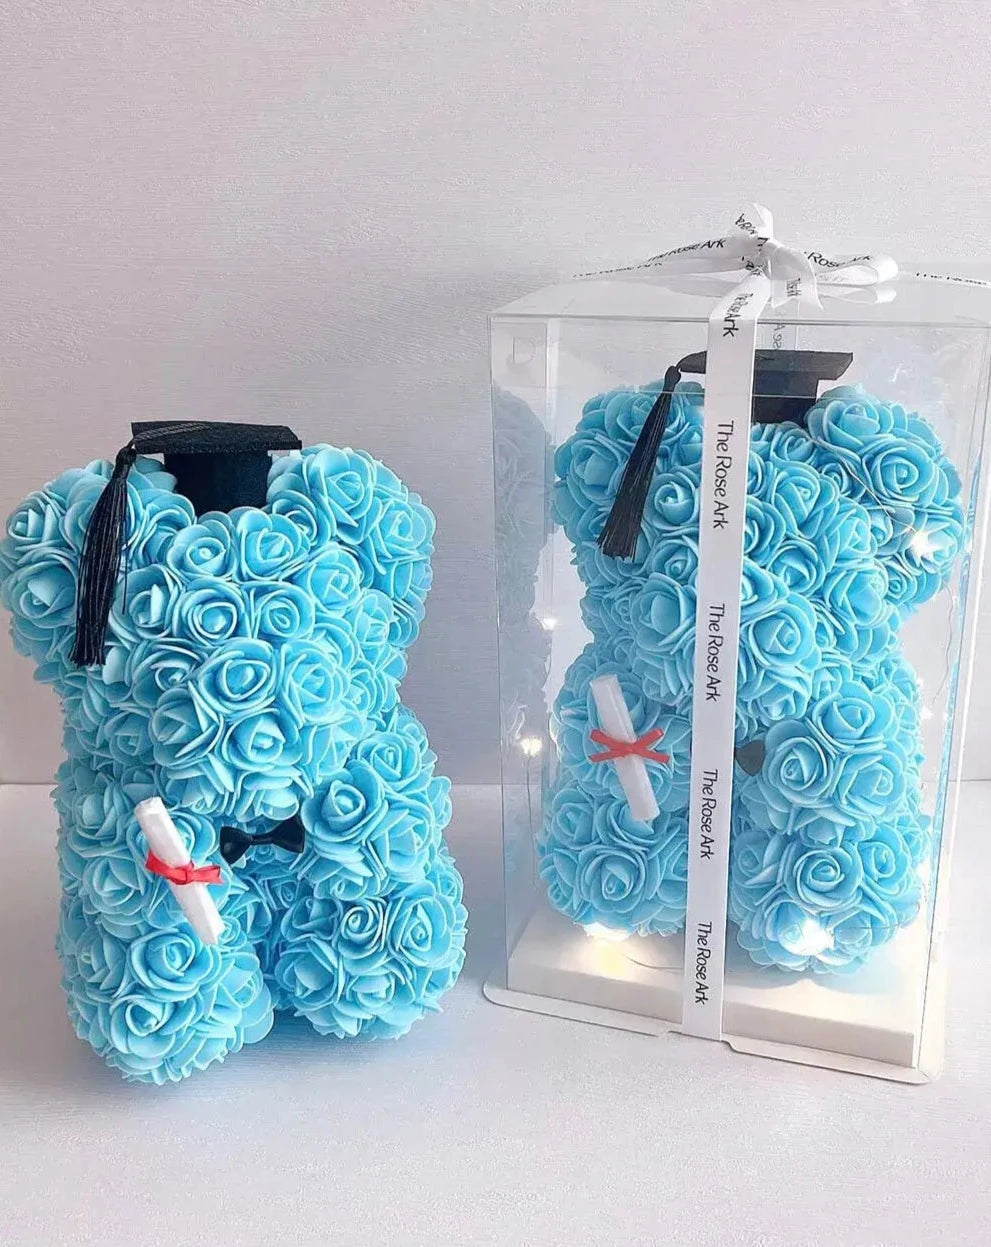 25cm Blue Graduation Rose Bear with Fairy Lights in Box The Rose Ark